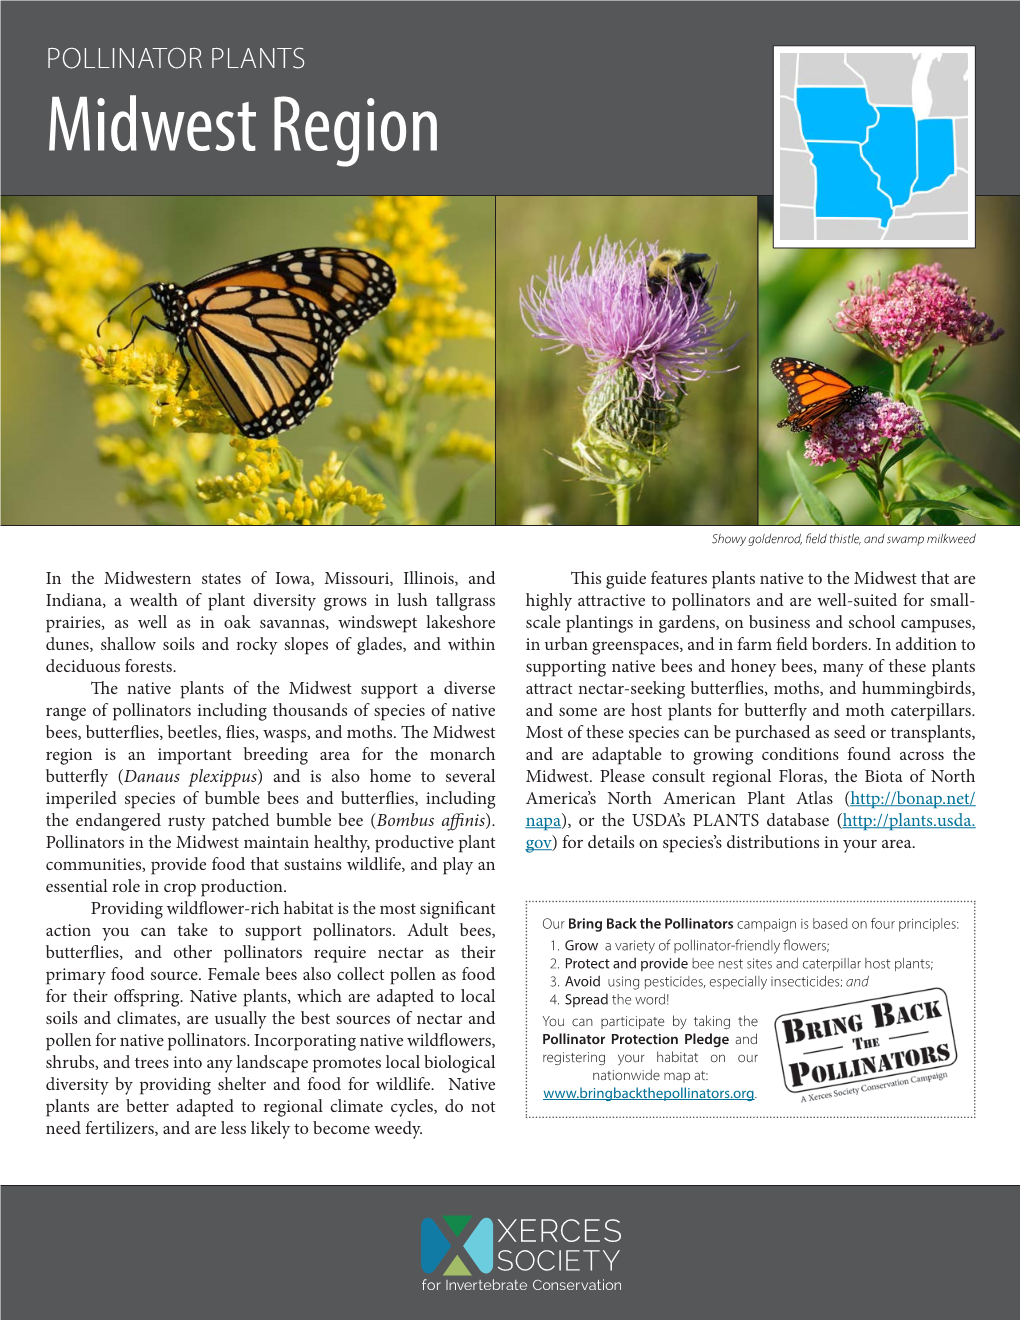 Pollinator Plants for the Midwest Region Was Produced by the Xerces® Society